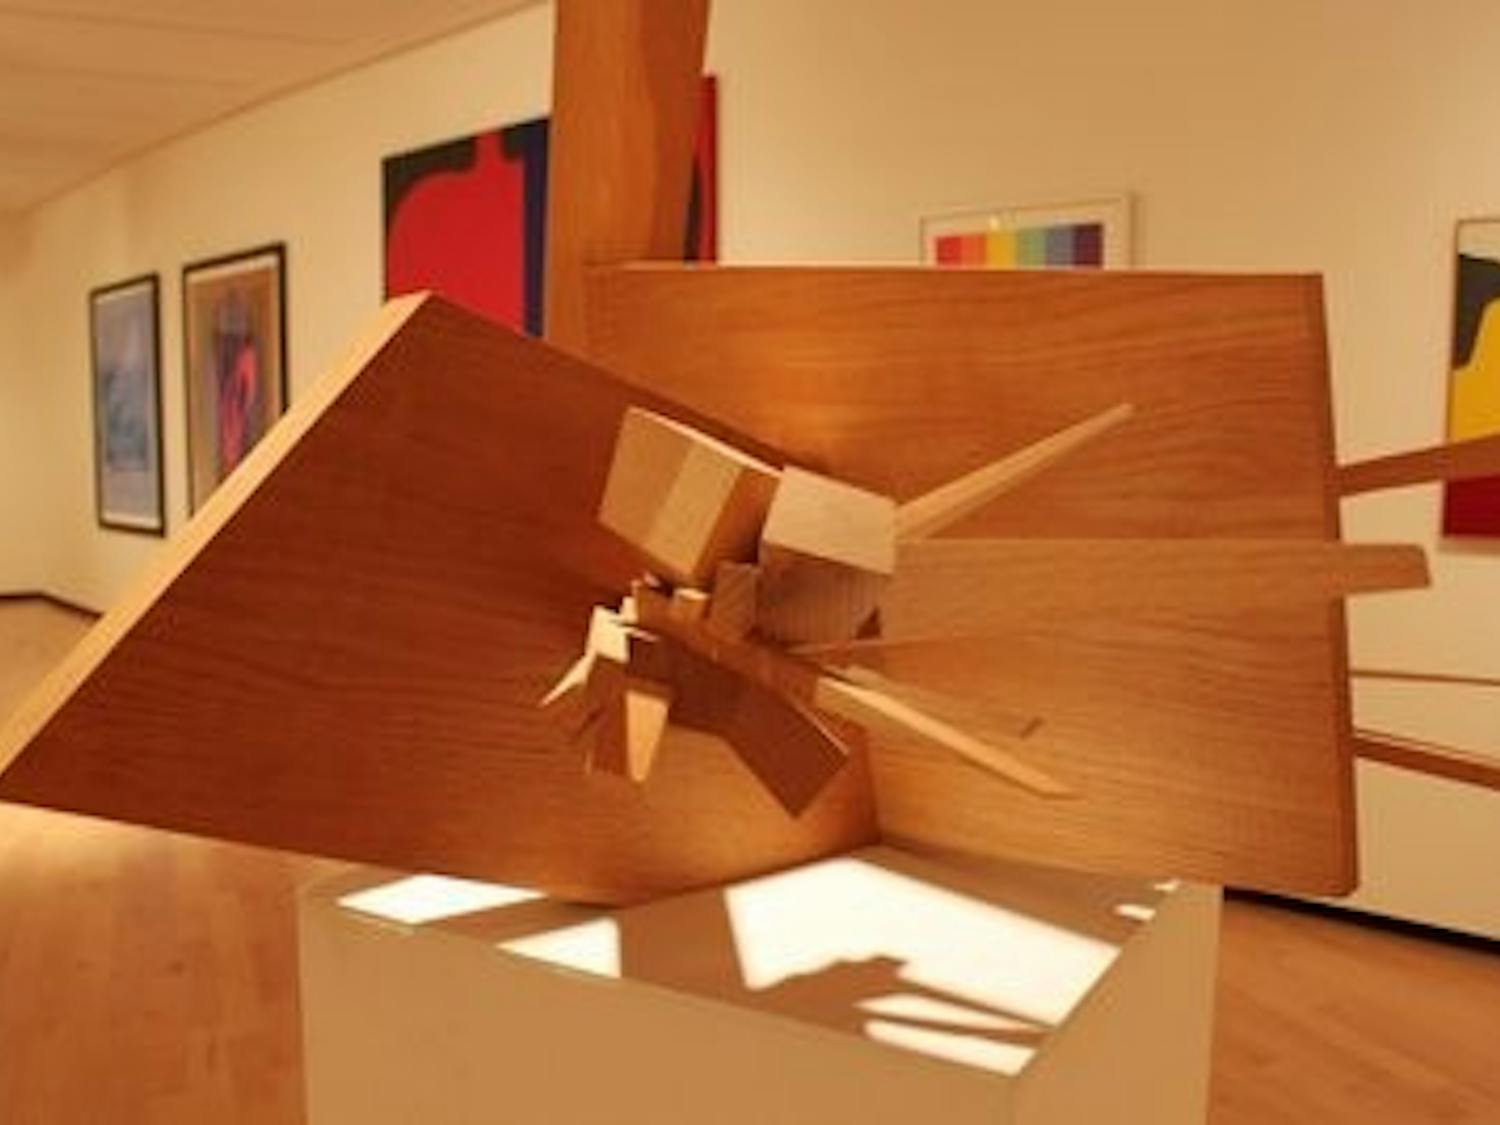 "Form, Line, and Color" is the most recent  exhibit at JCSM.